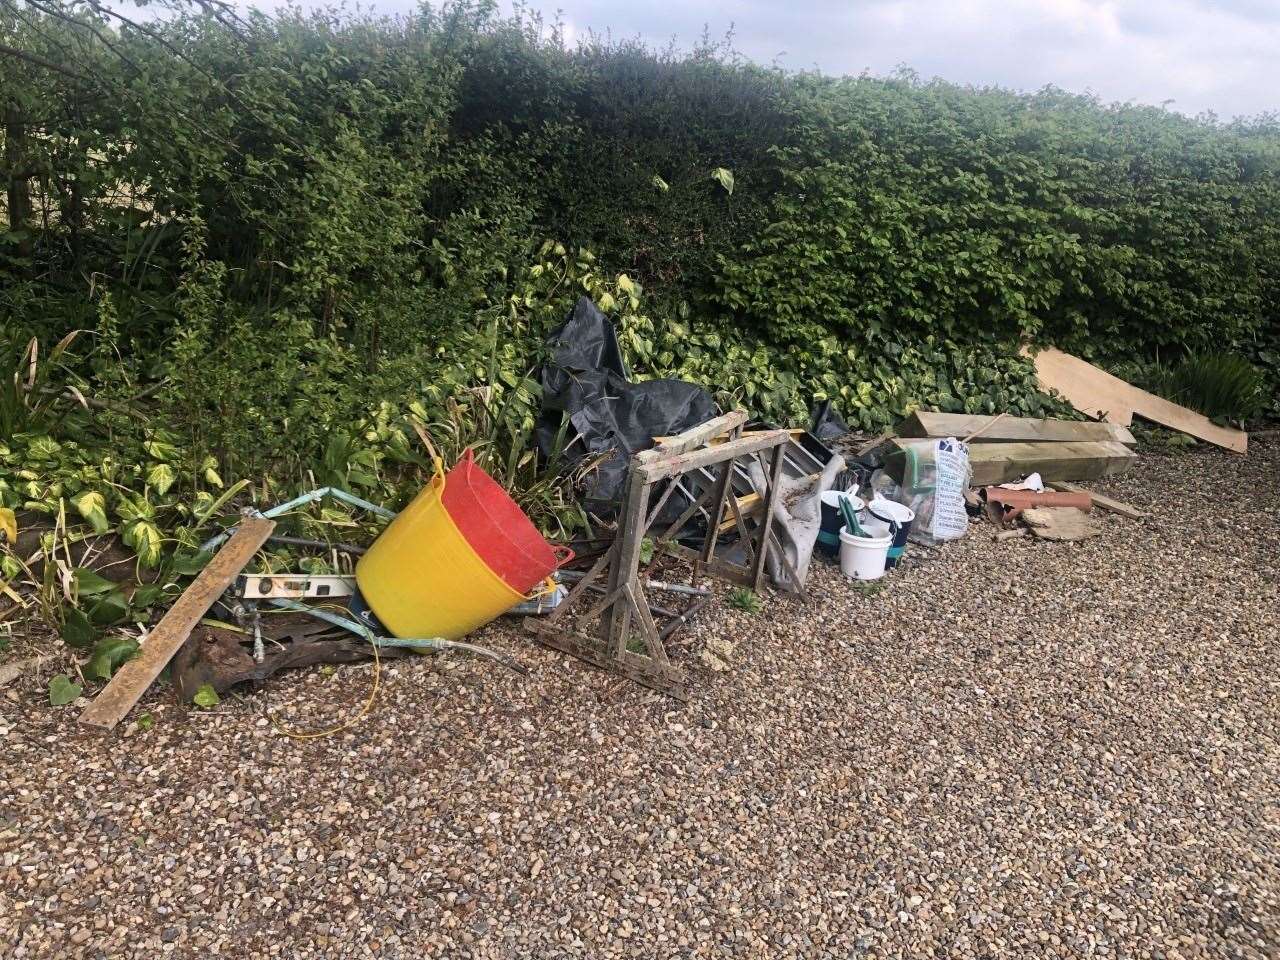 Builder's items left behind in the garden of Sandra and Stephen West's home in Benenden, near Tunbridge Wells. Picture: SWNS